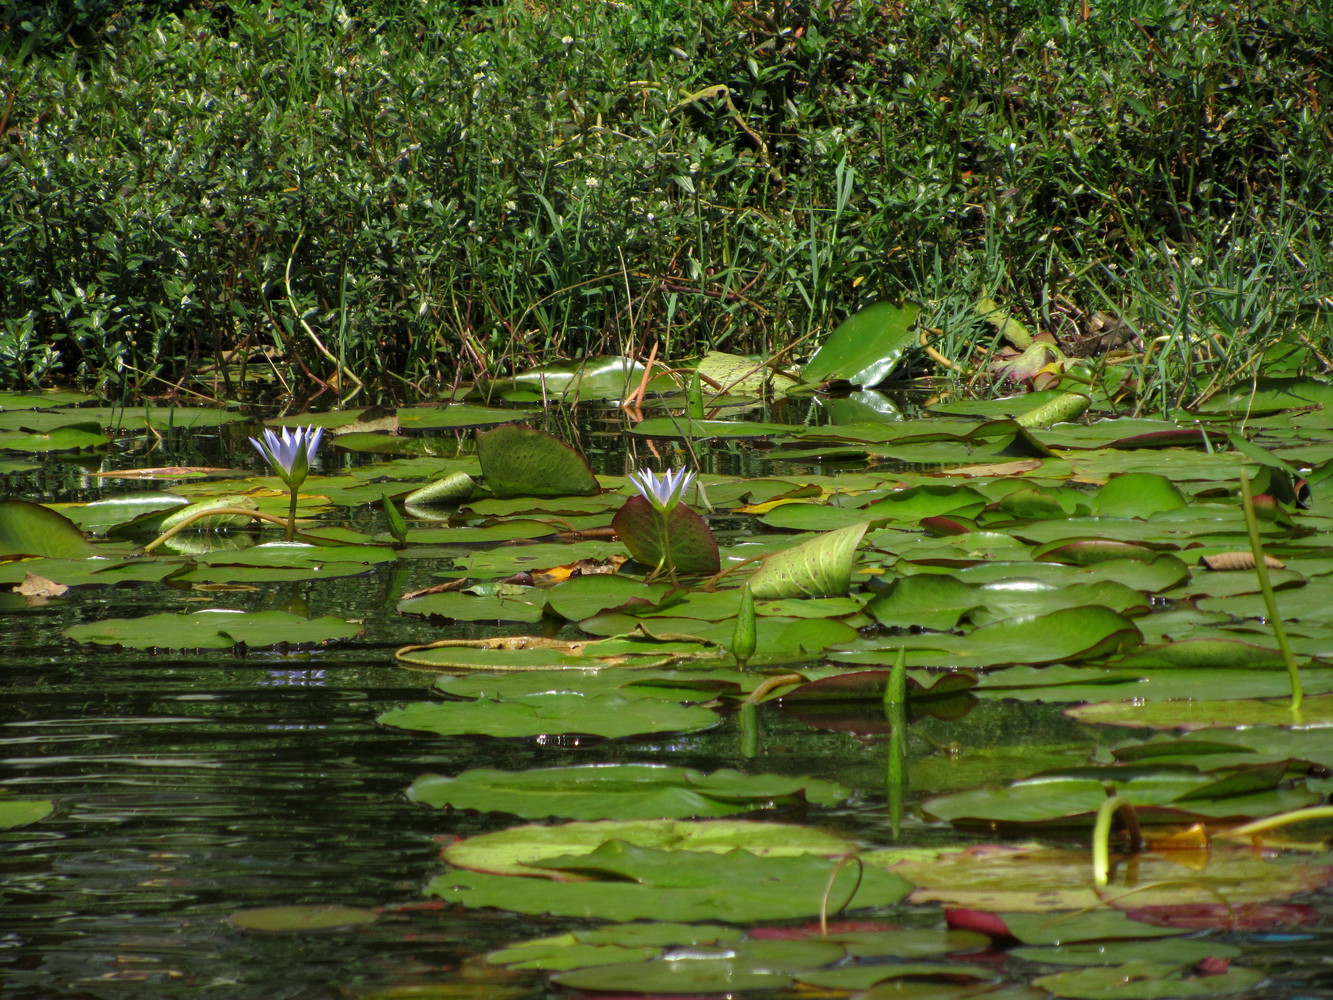 Lotus plants with two lotus flowers in a lake